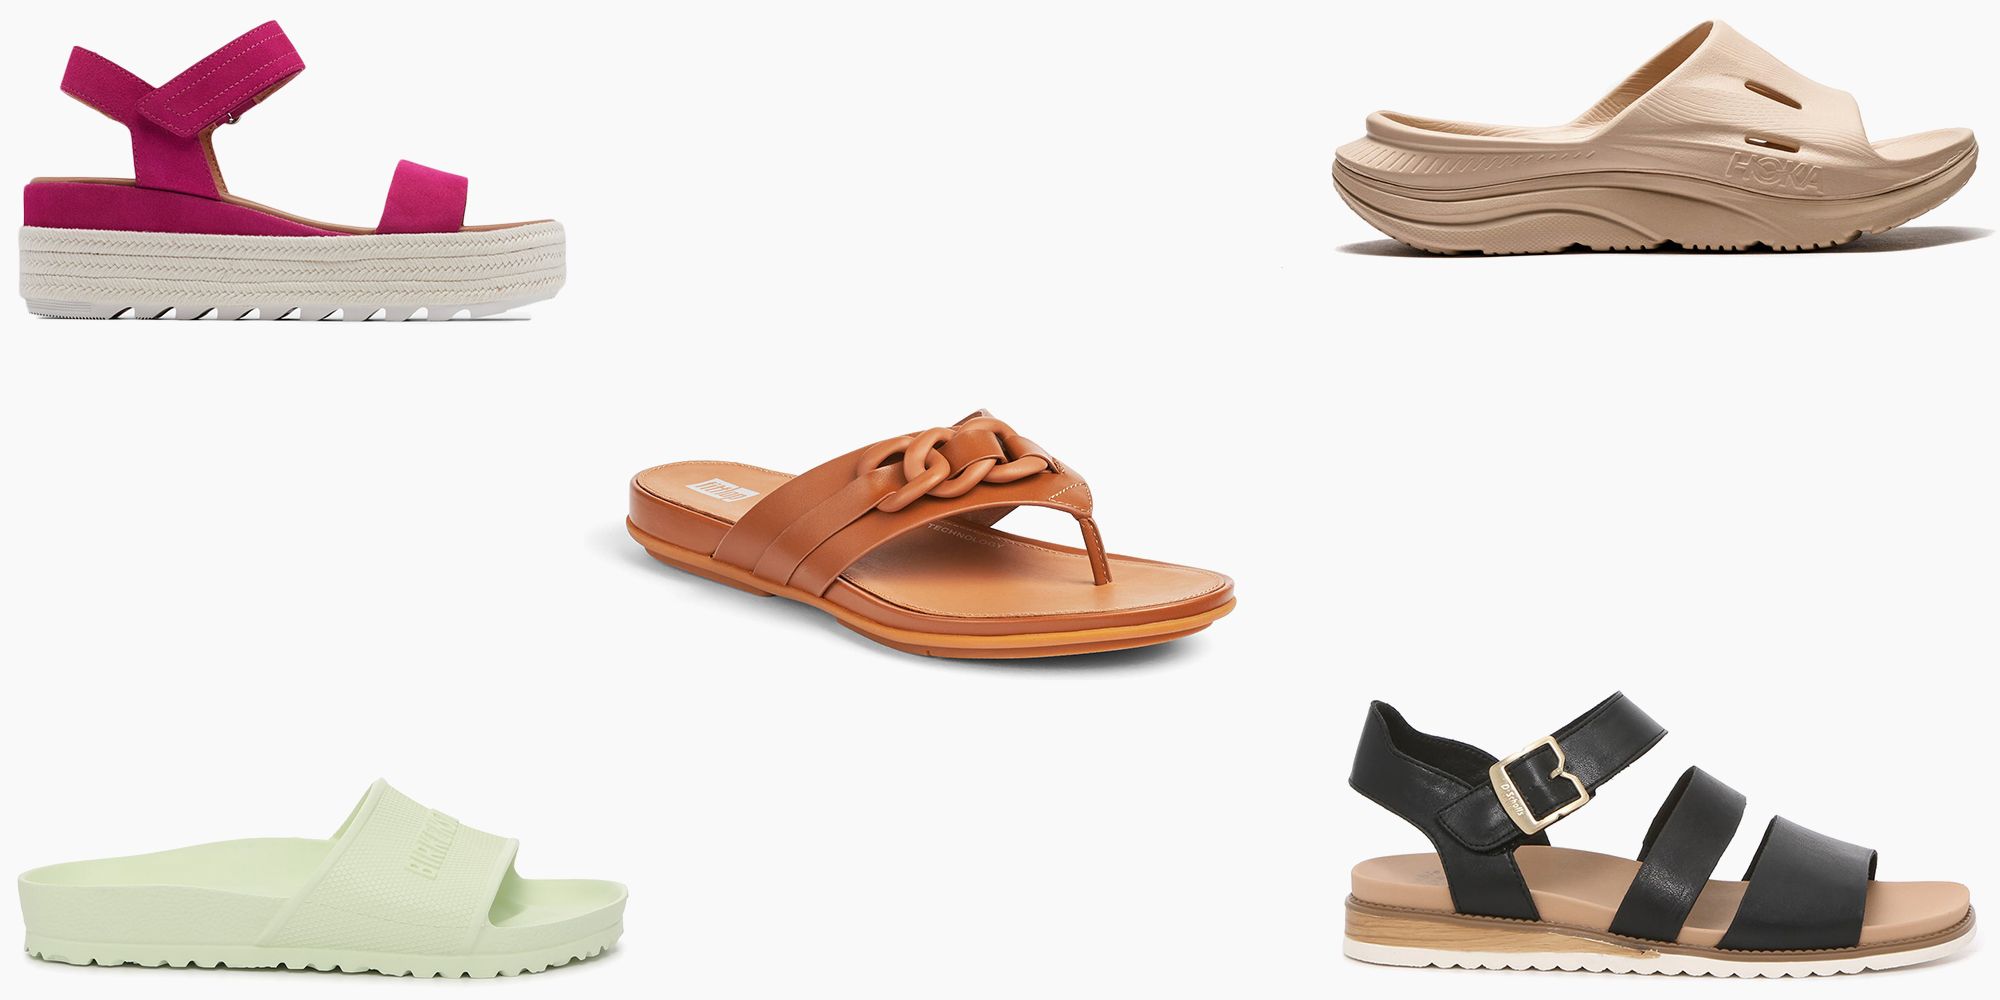 Sandals With Arch Support: 8 Picks for Sure Comfort All Summer